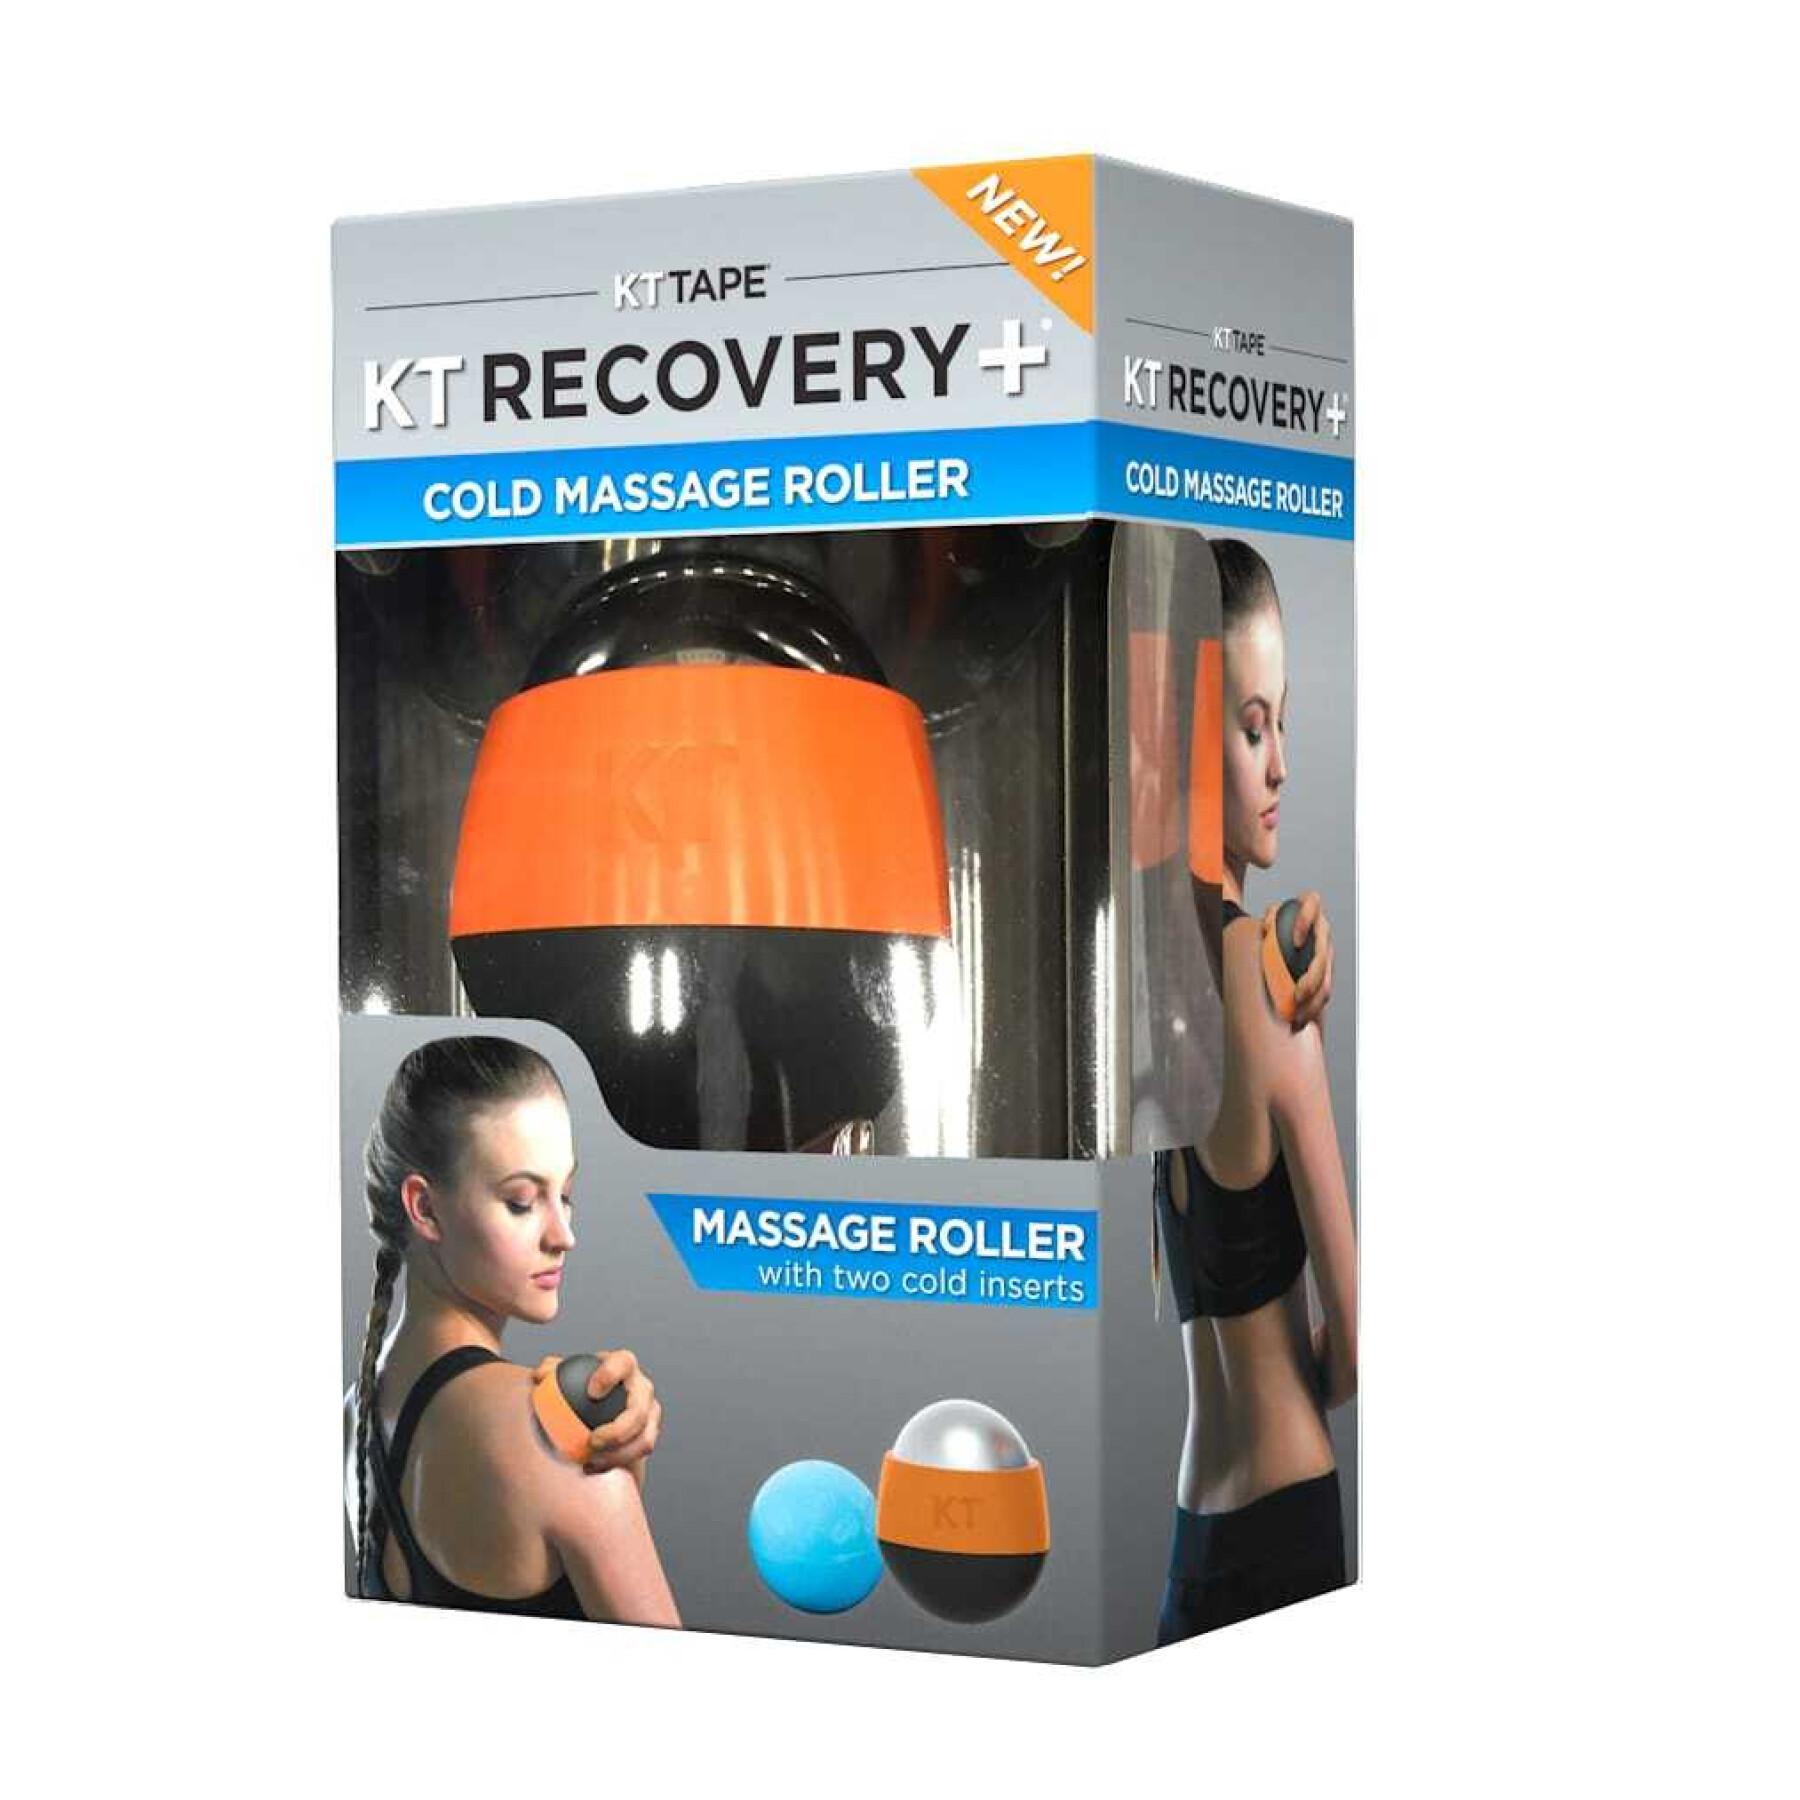 Kalte Massagerolle KT Tape Recovery +